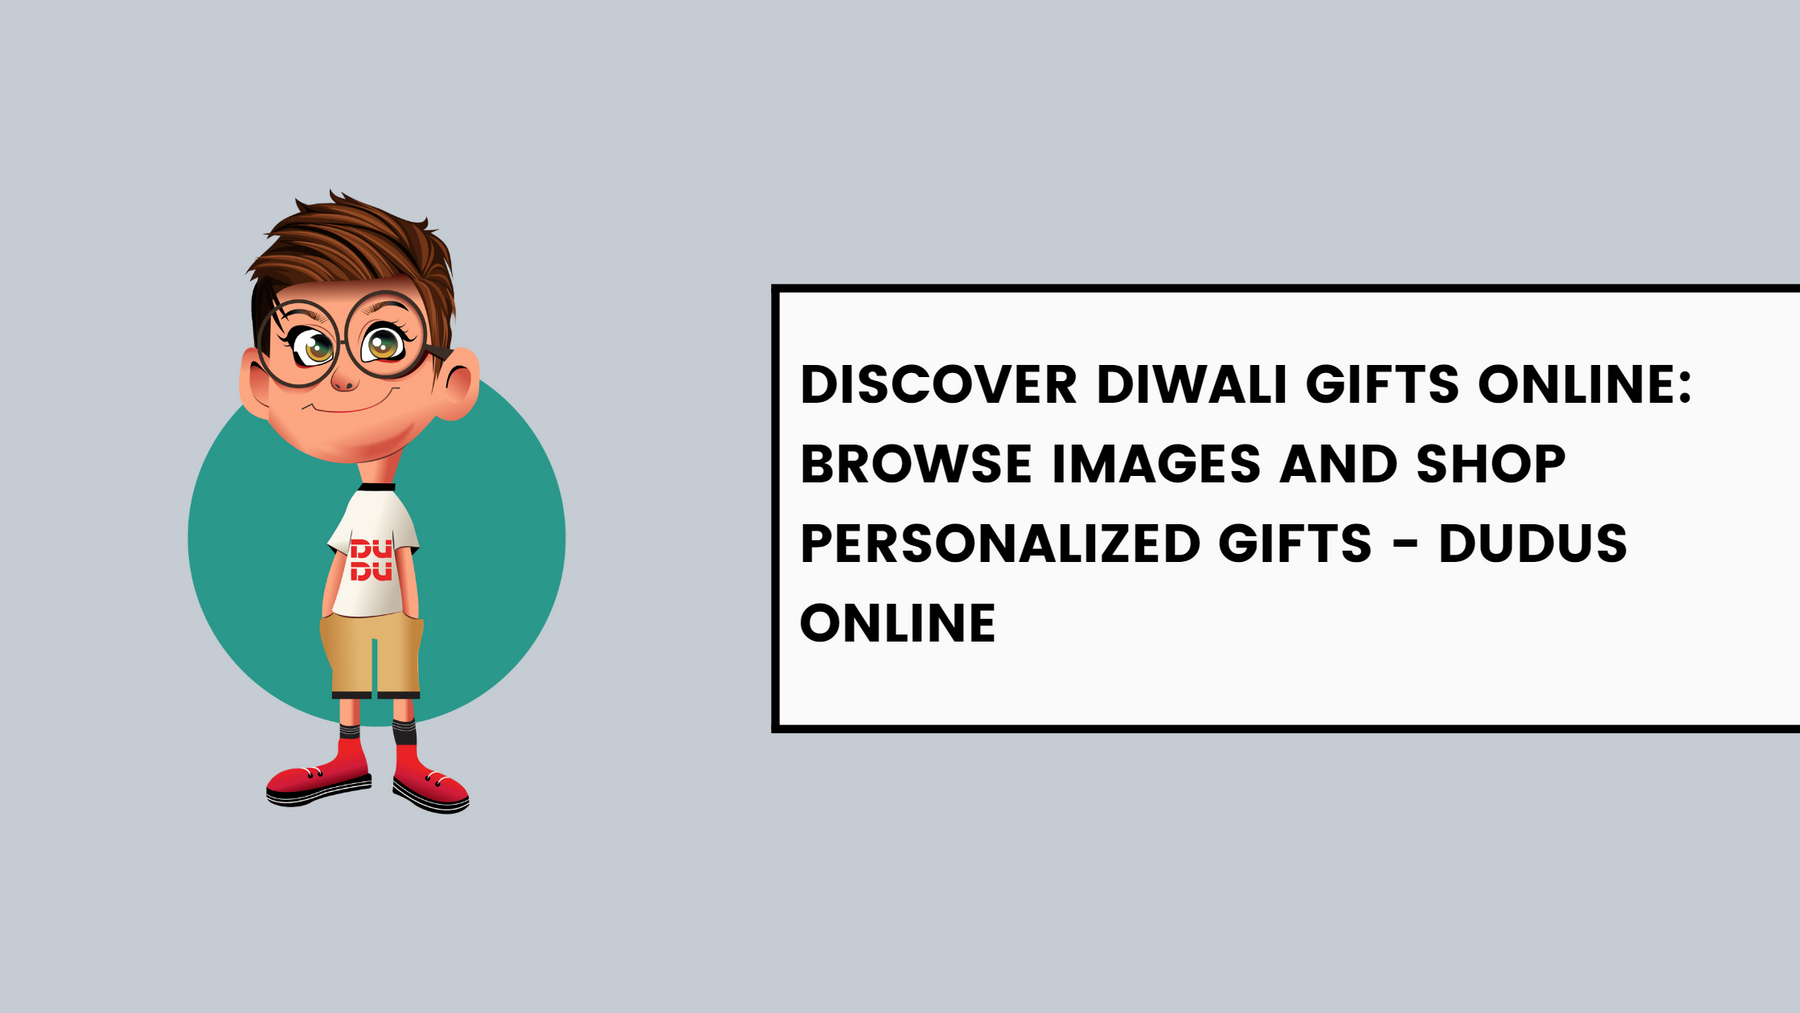 Discover Diwali Gifts Online: Browse Images and Shop Personalized Gifts - Dudus Online